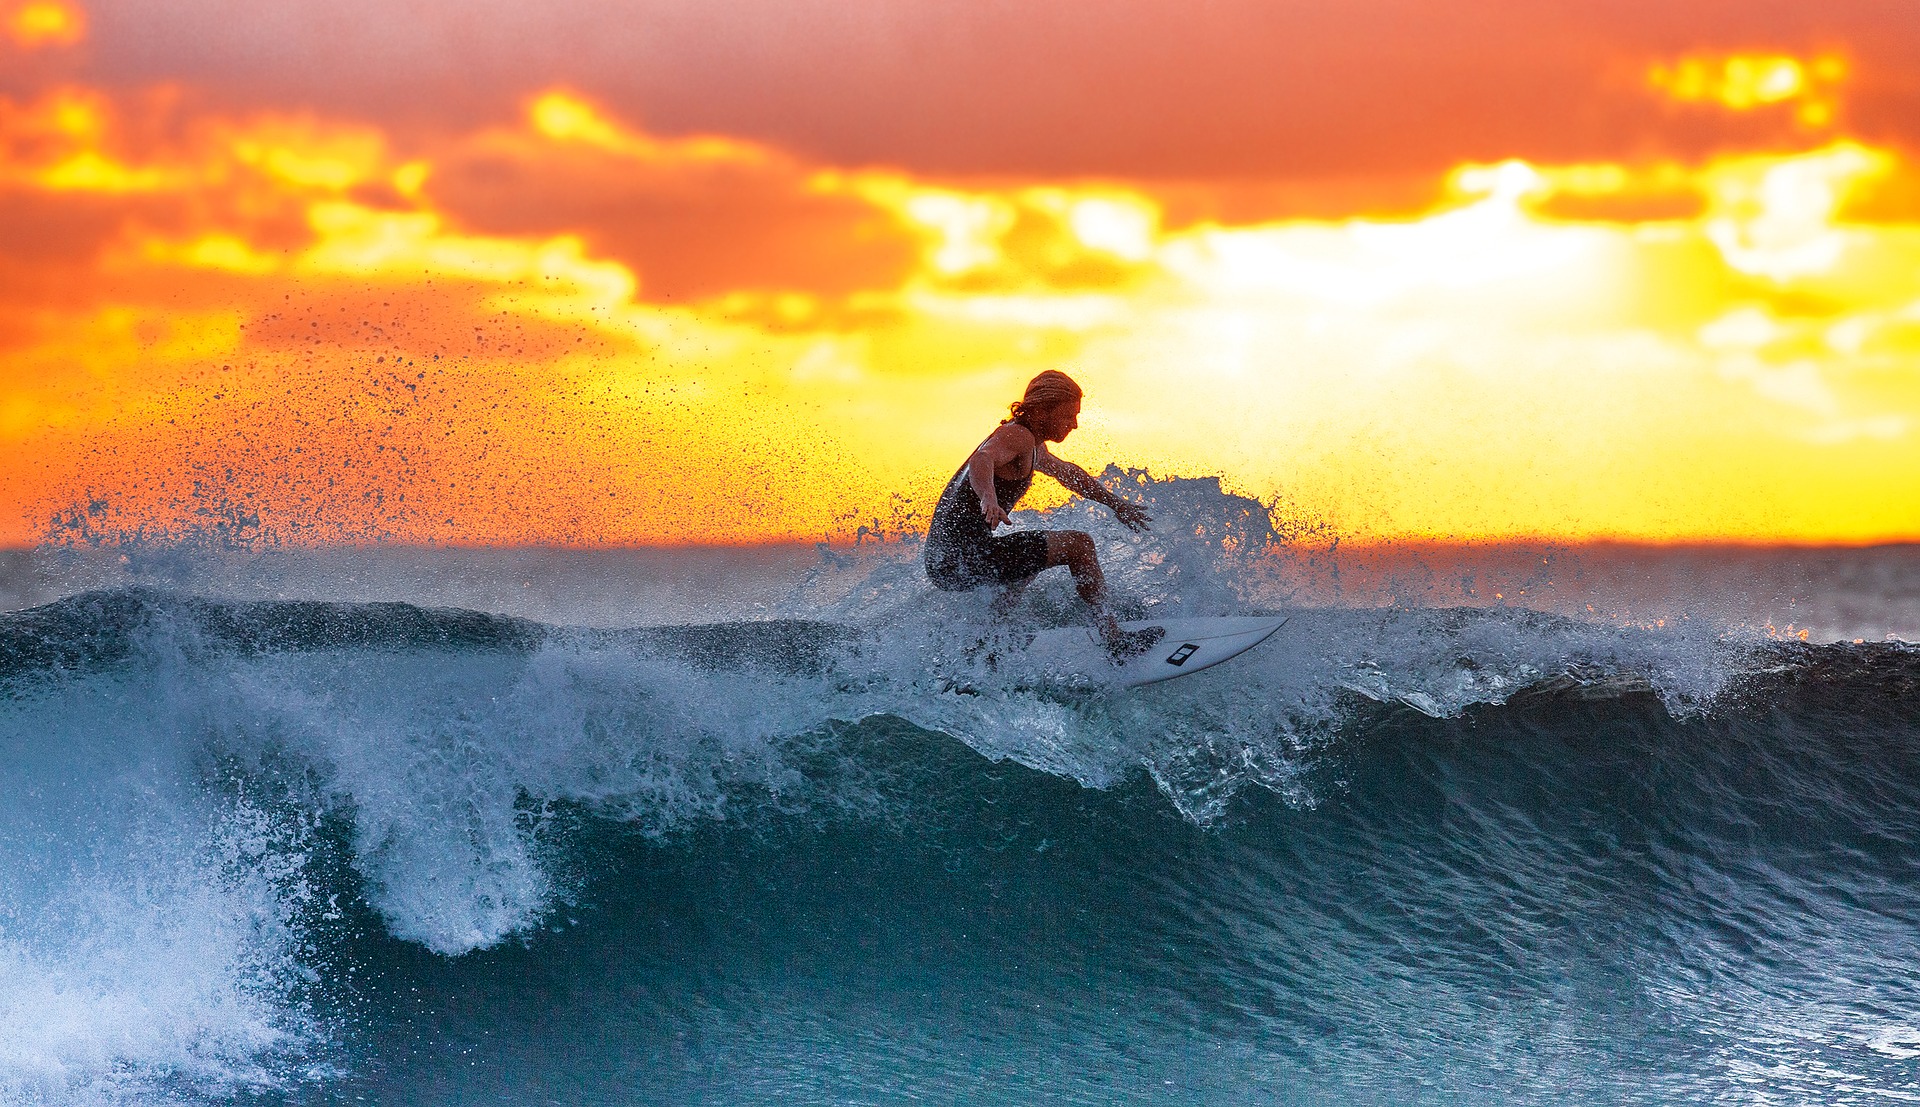 7 facts about surfing that every beginner should know